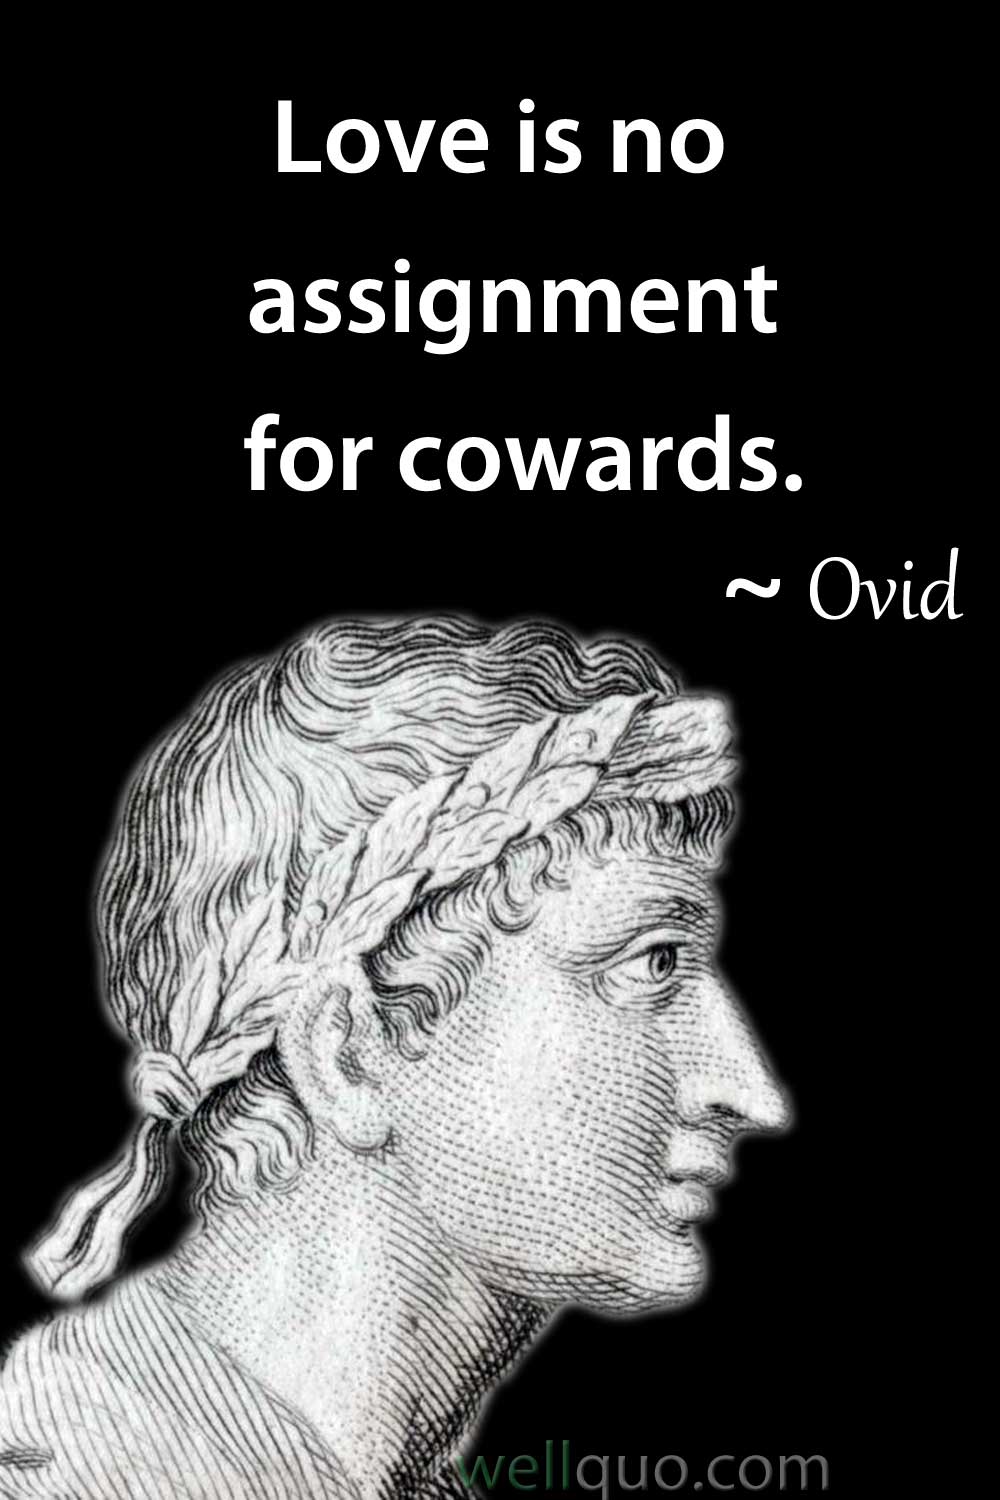 Quotes about Love by Ovid